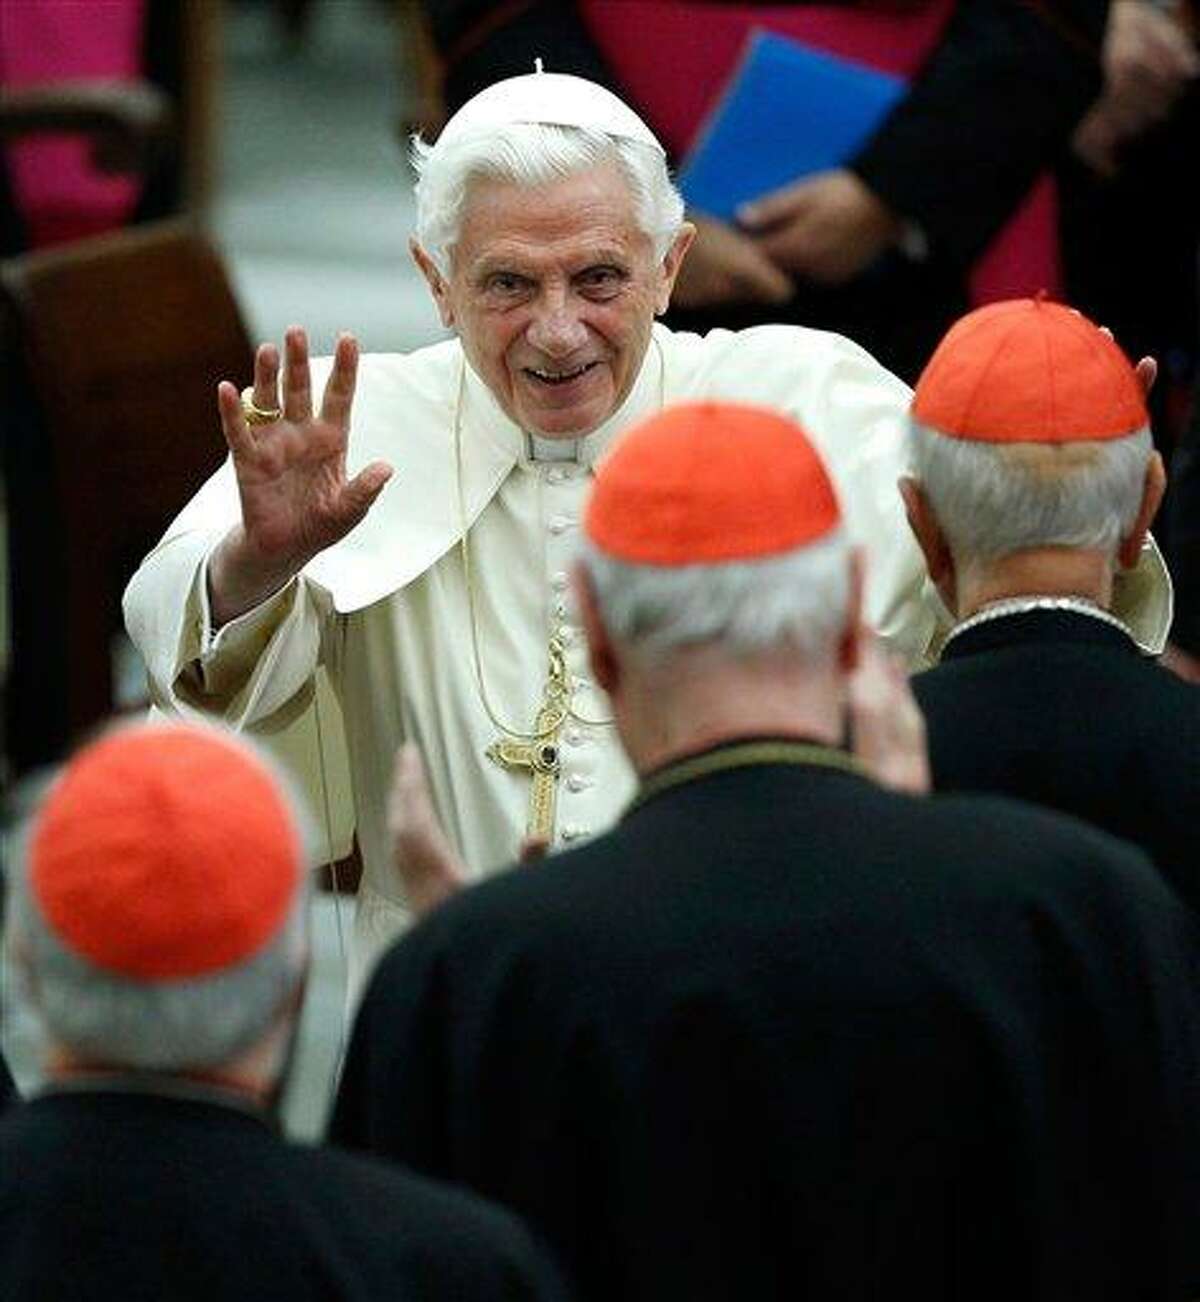 Pope Benedict XVI waving as he leaves Paul VI hall after attending a concert of the Asturias Principality Symphony Orchestra directed by Chilean conductor Maximiano Valdes, at the Vatican. On Monday, Feb. 11, 2013 the Vatican announced that Pope Benedict XVI will resign on Feb. 28, 2013. AP Photo/ Isabella Bonotto